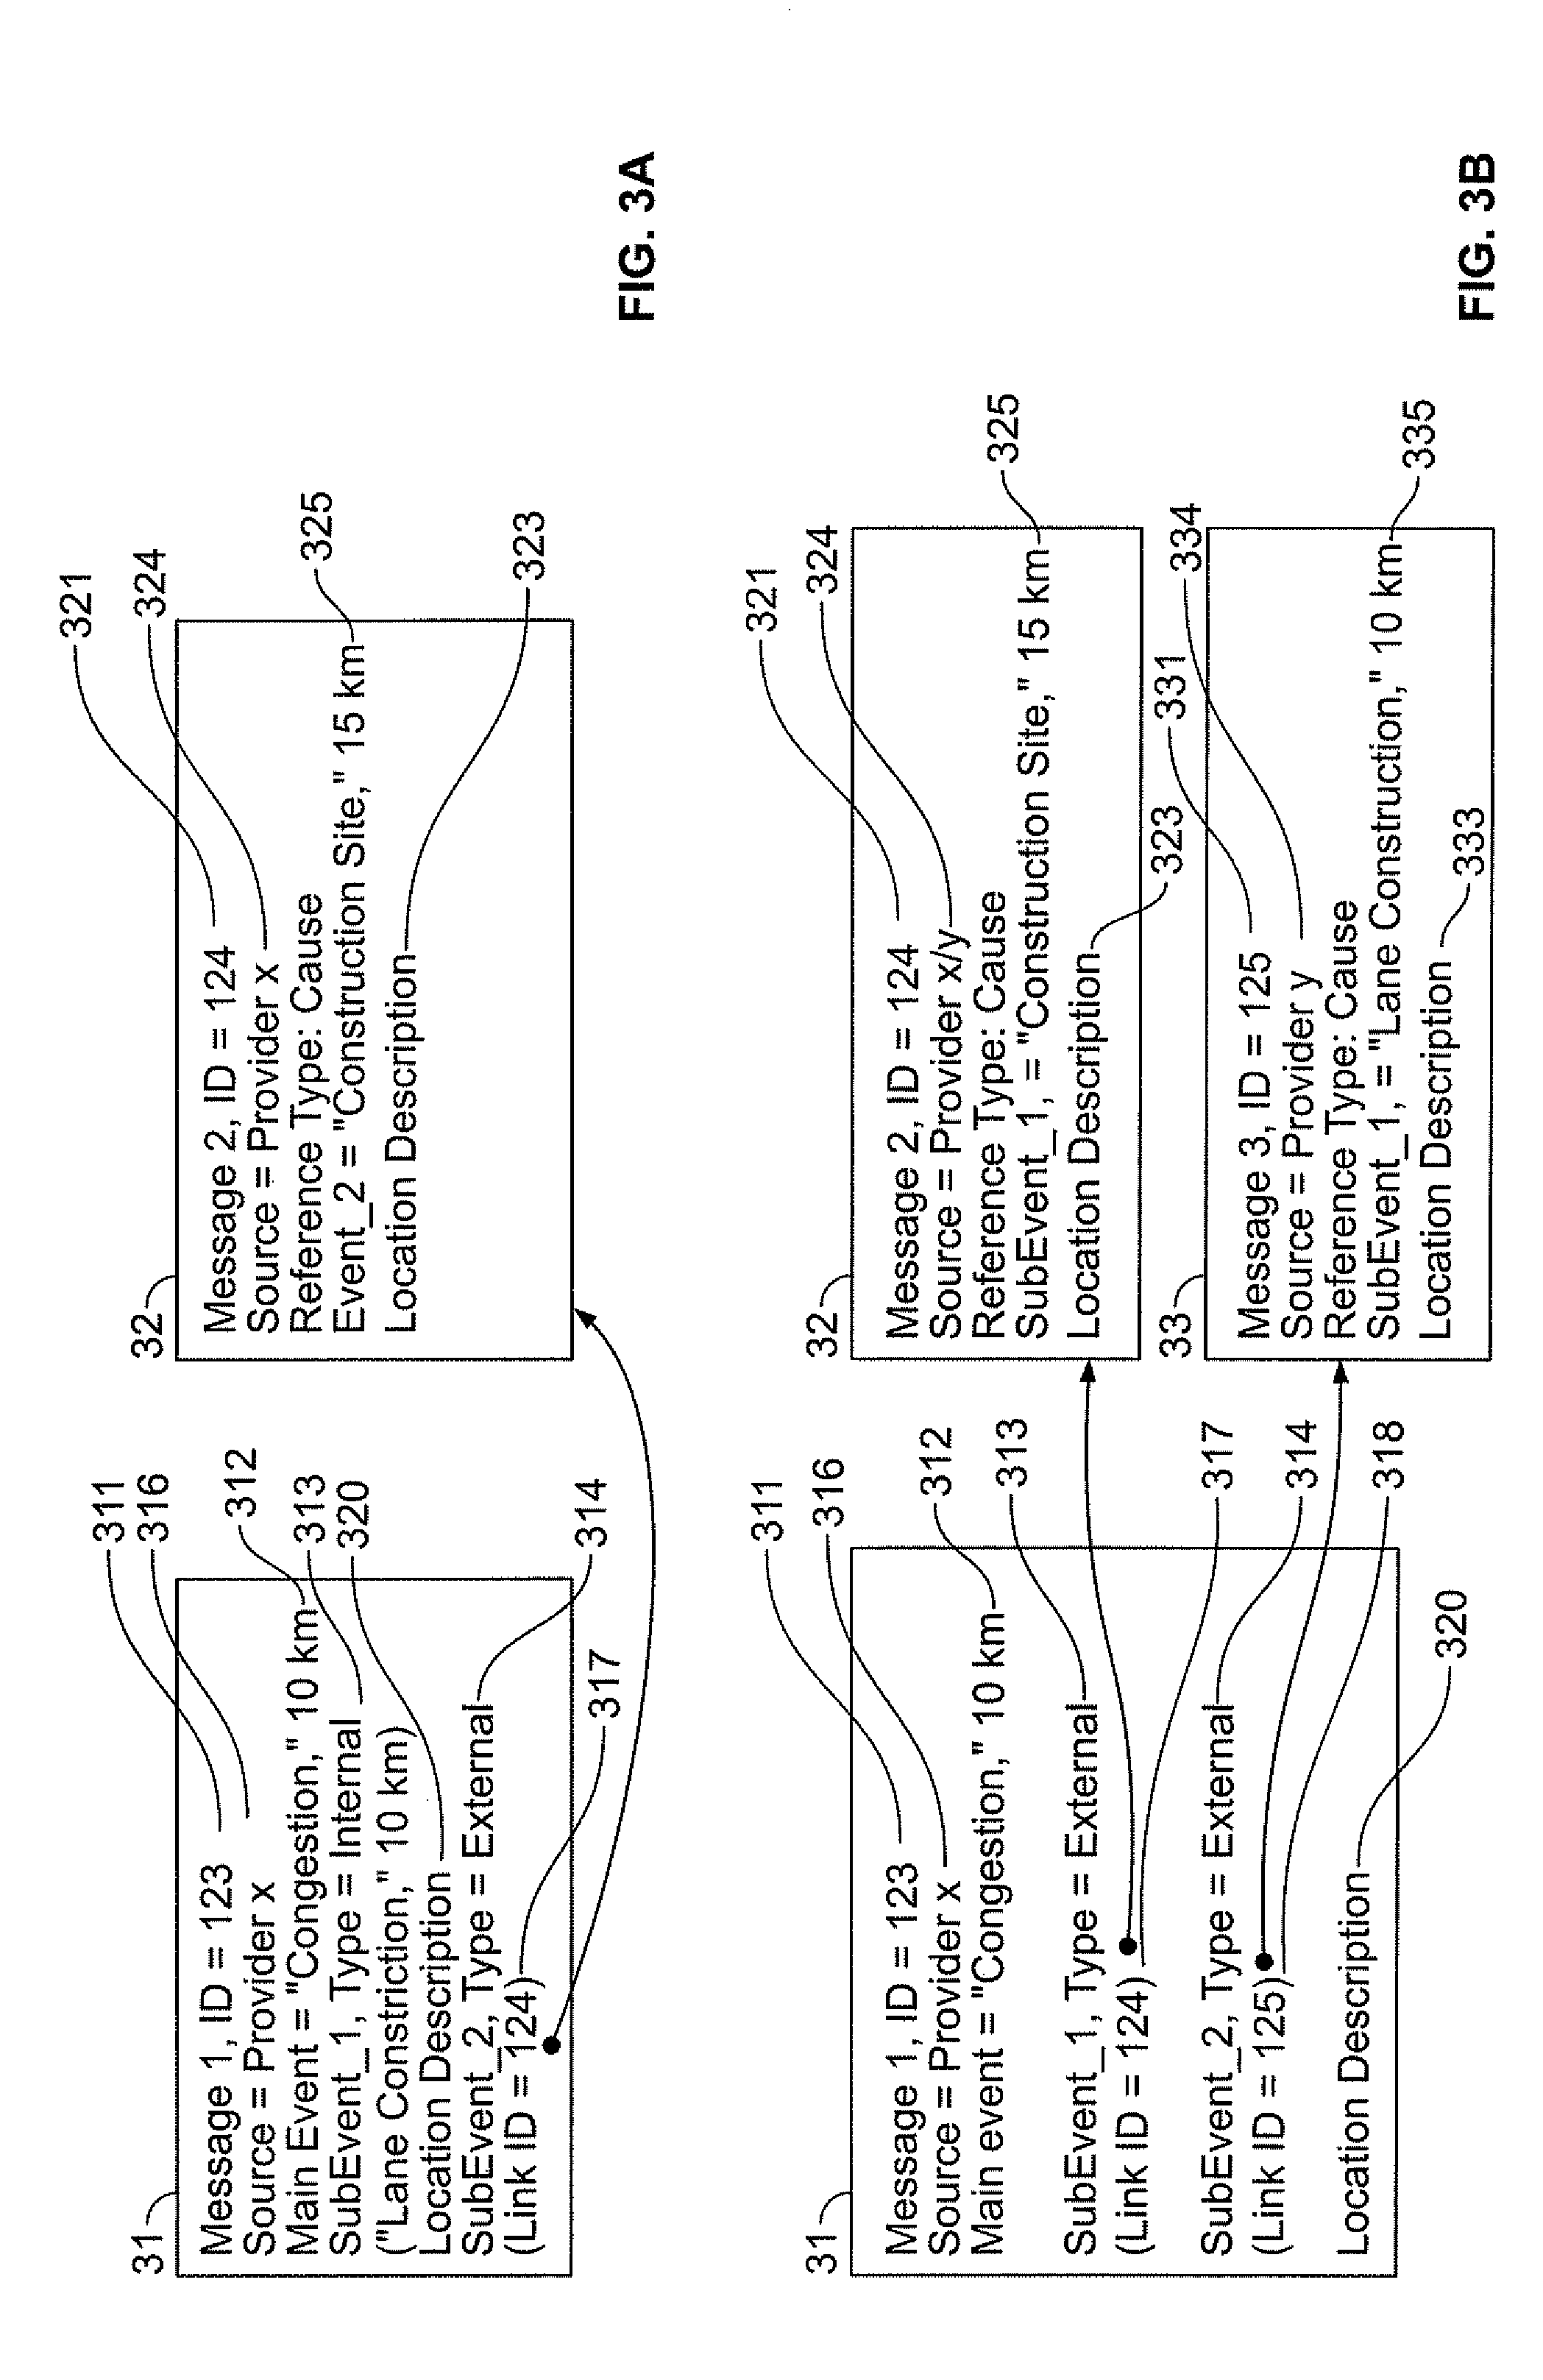 Method for encoding messages, method for decoding messages, and receiver for receiving and evaluating messages